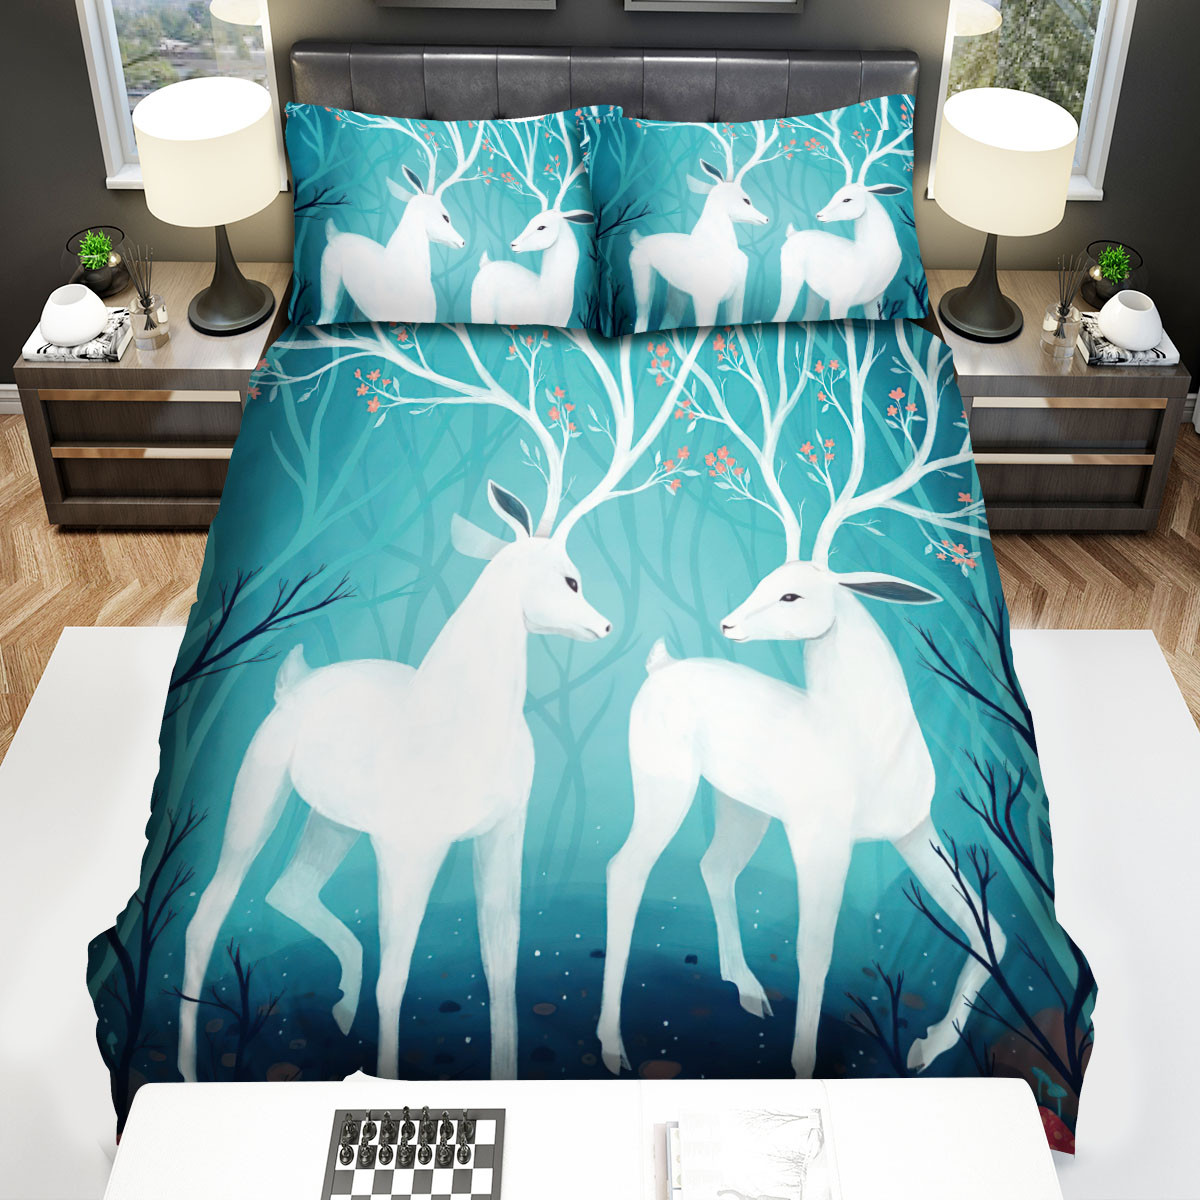 white deer pair art duvet cover bedding collections afen8